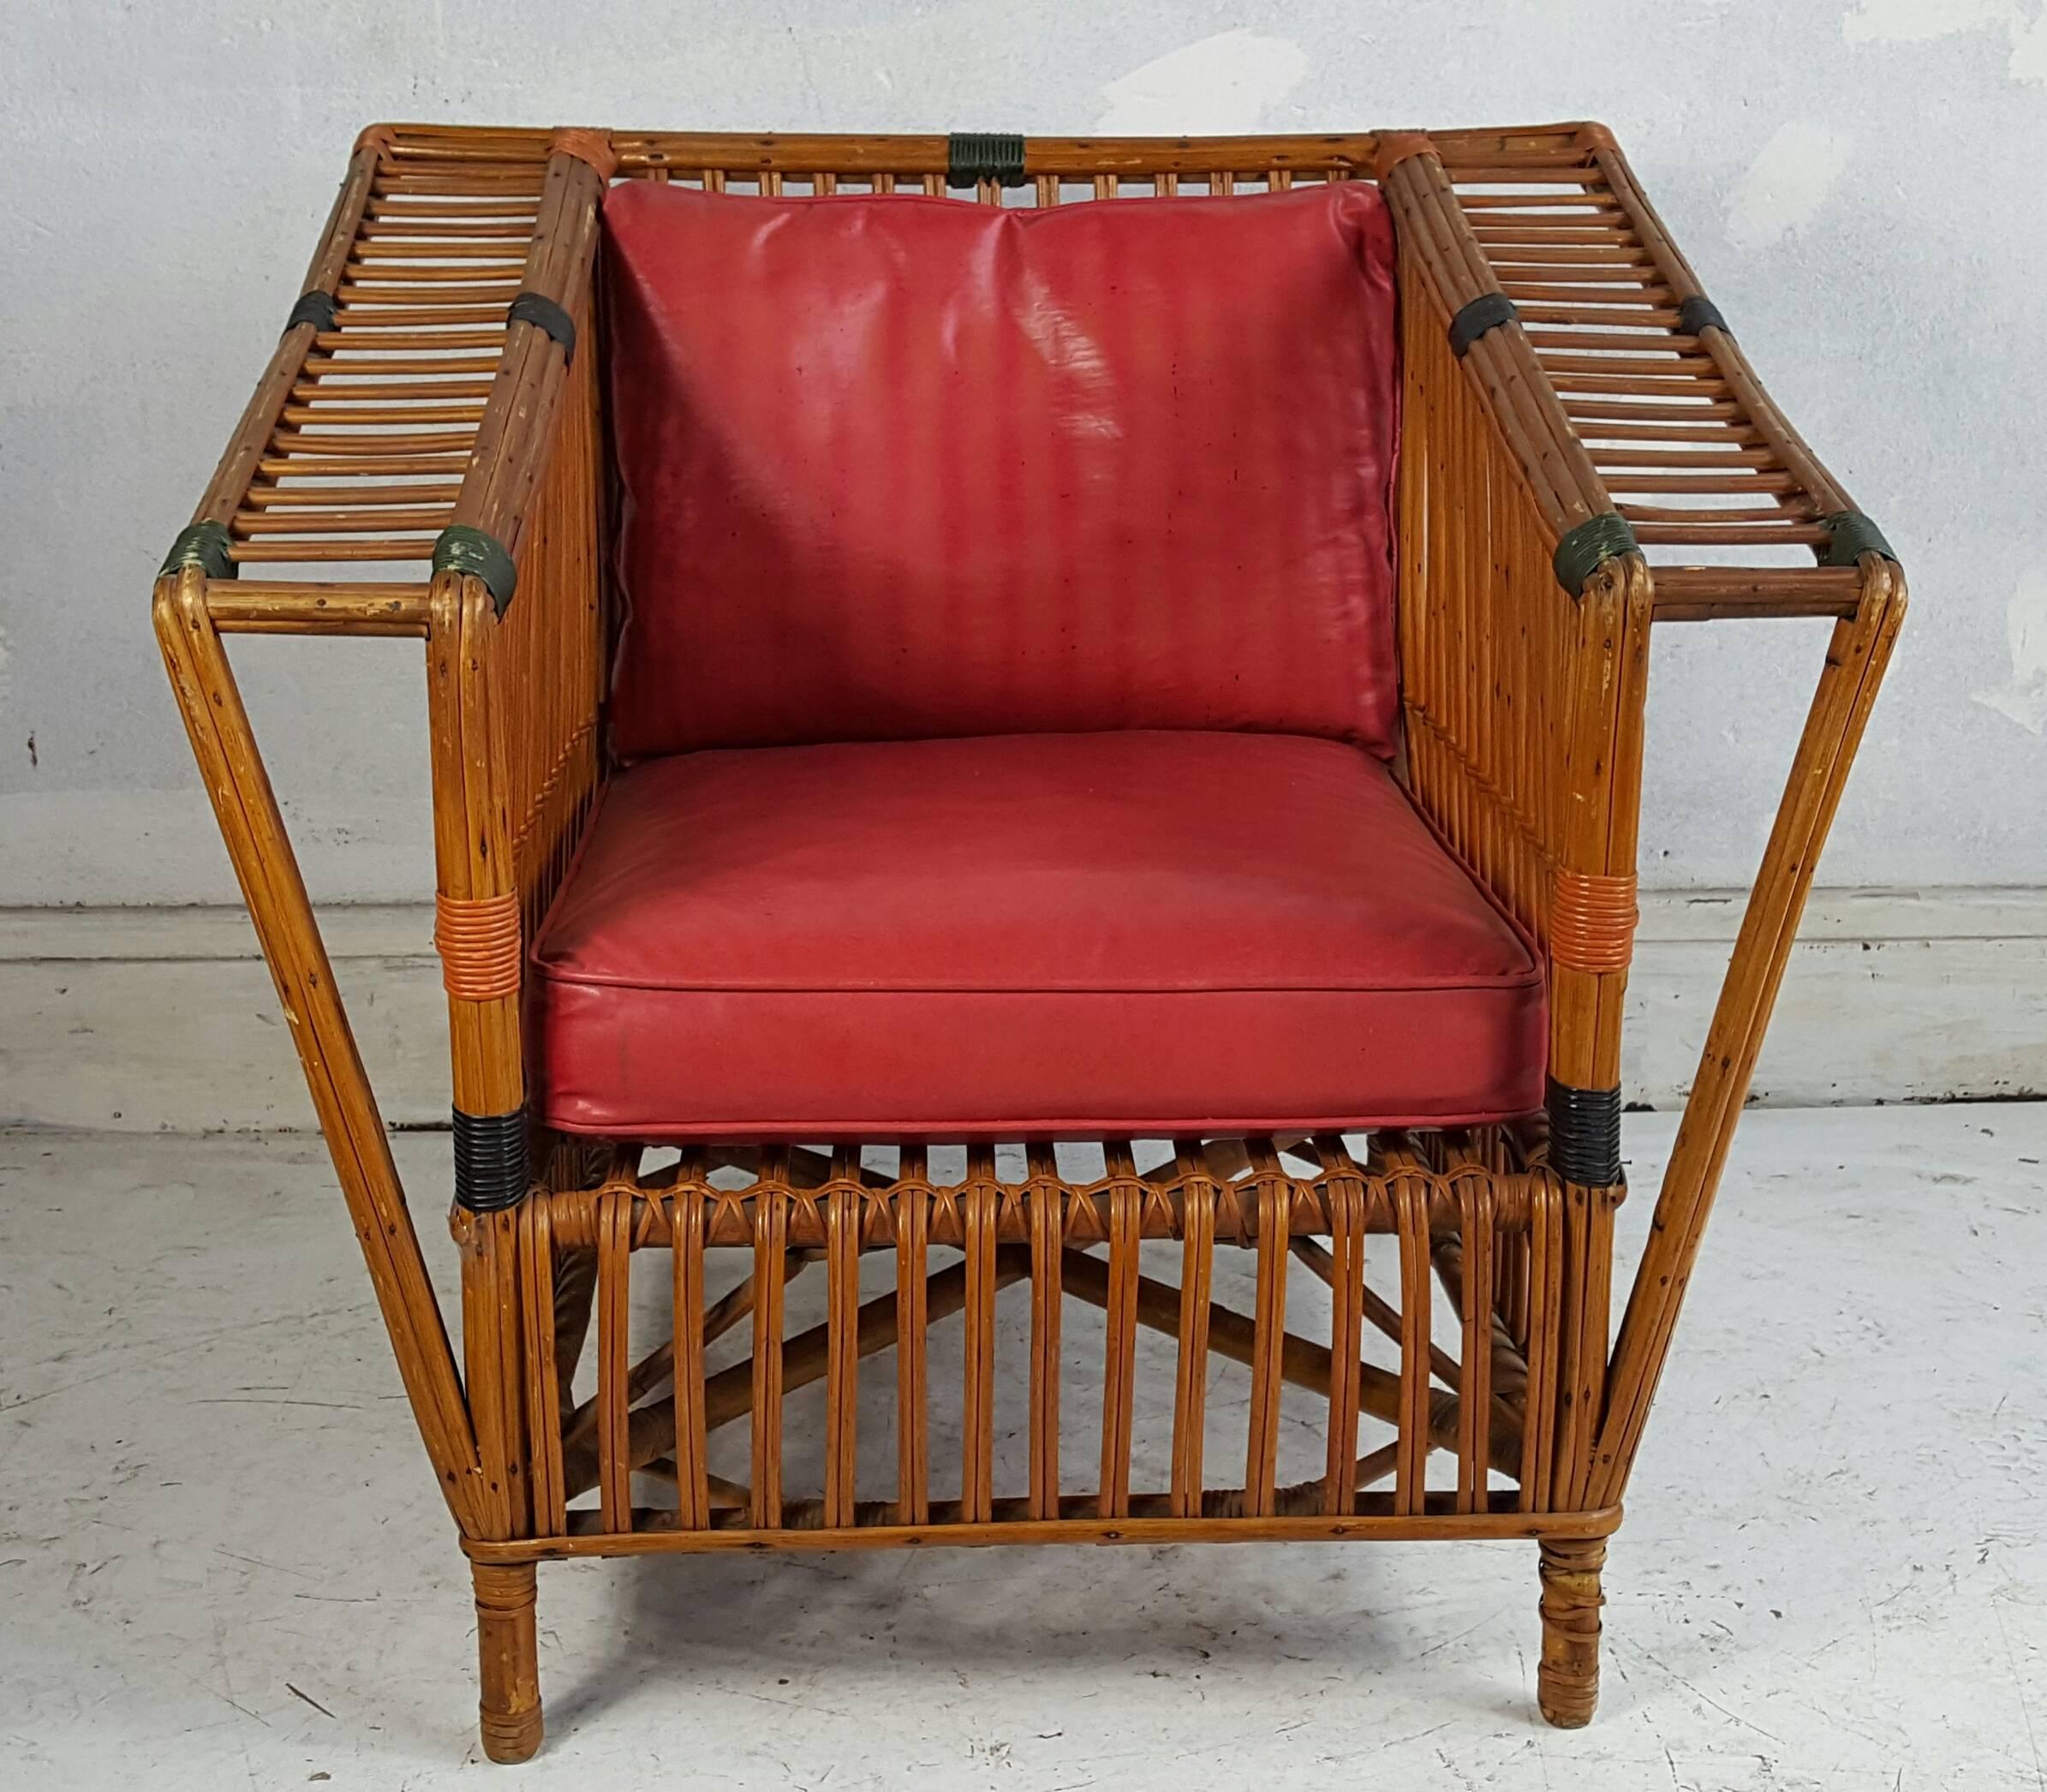 Unusual Art Deco Stick Wicker, split reed armchair, stream-line modern. Classic example, retains original finish, green and orange patinated paint. Extremely comfortable.